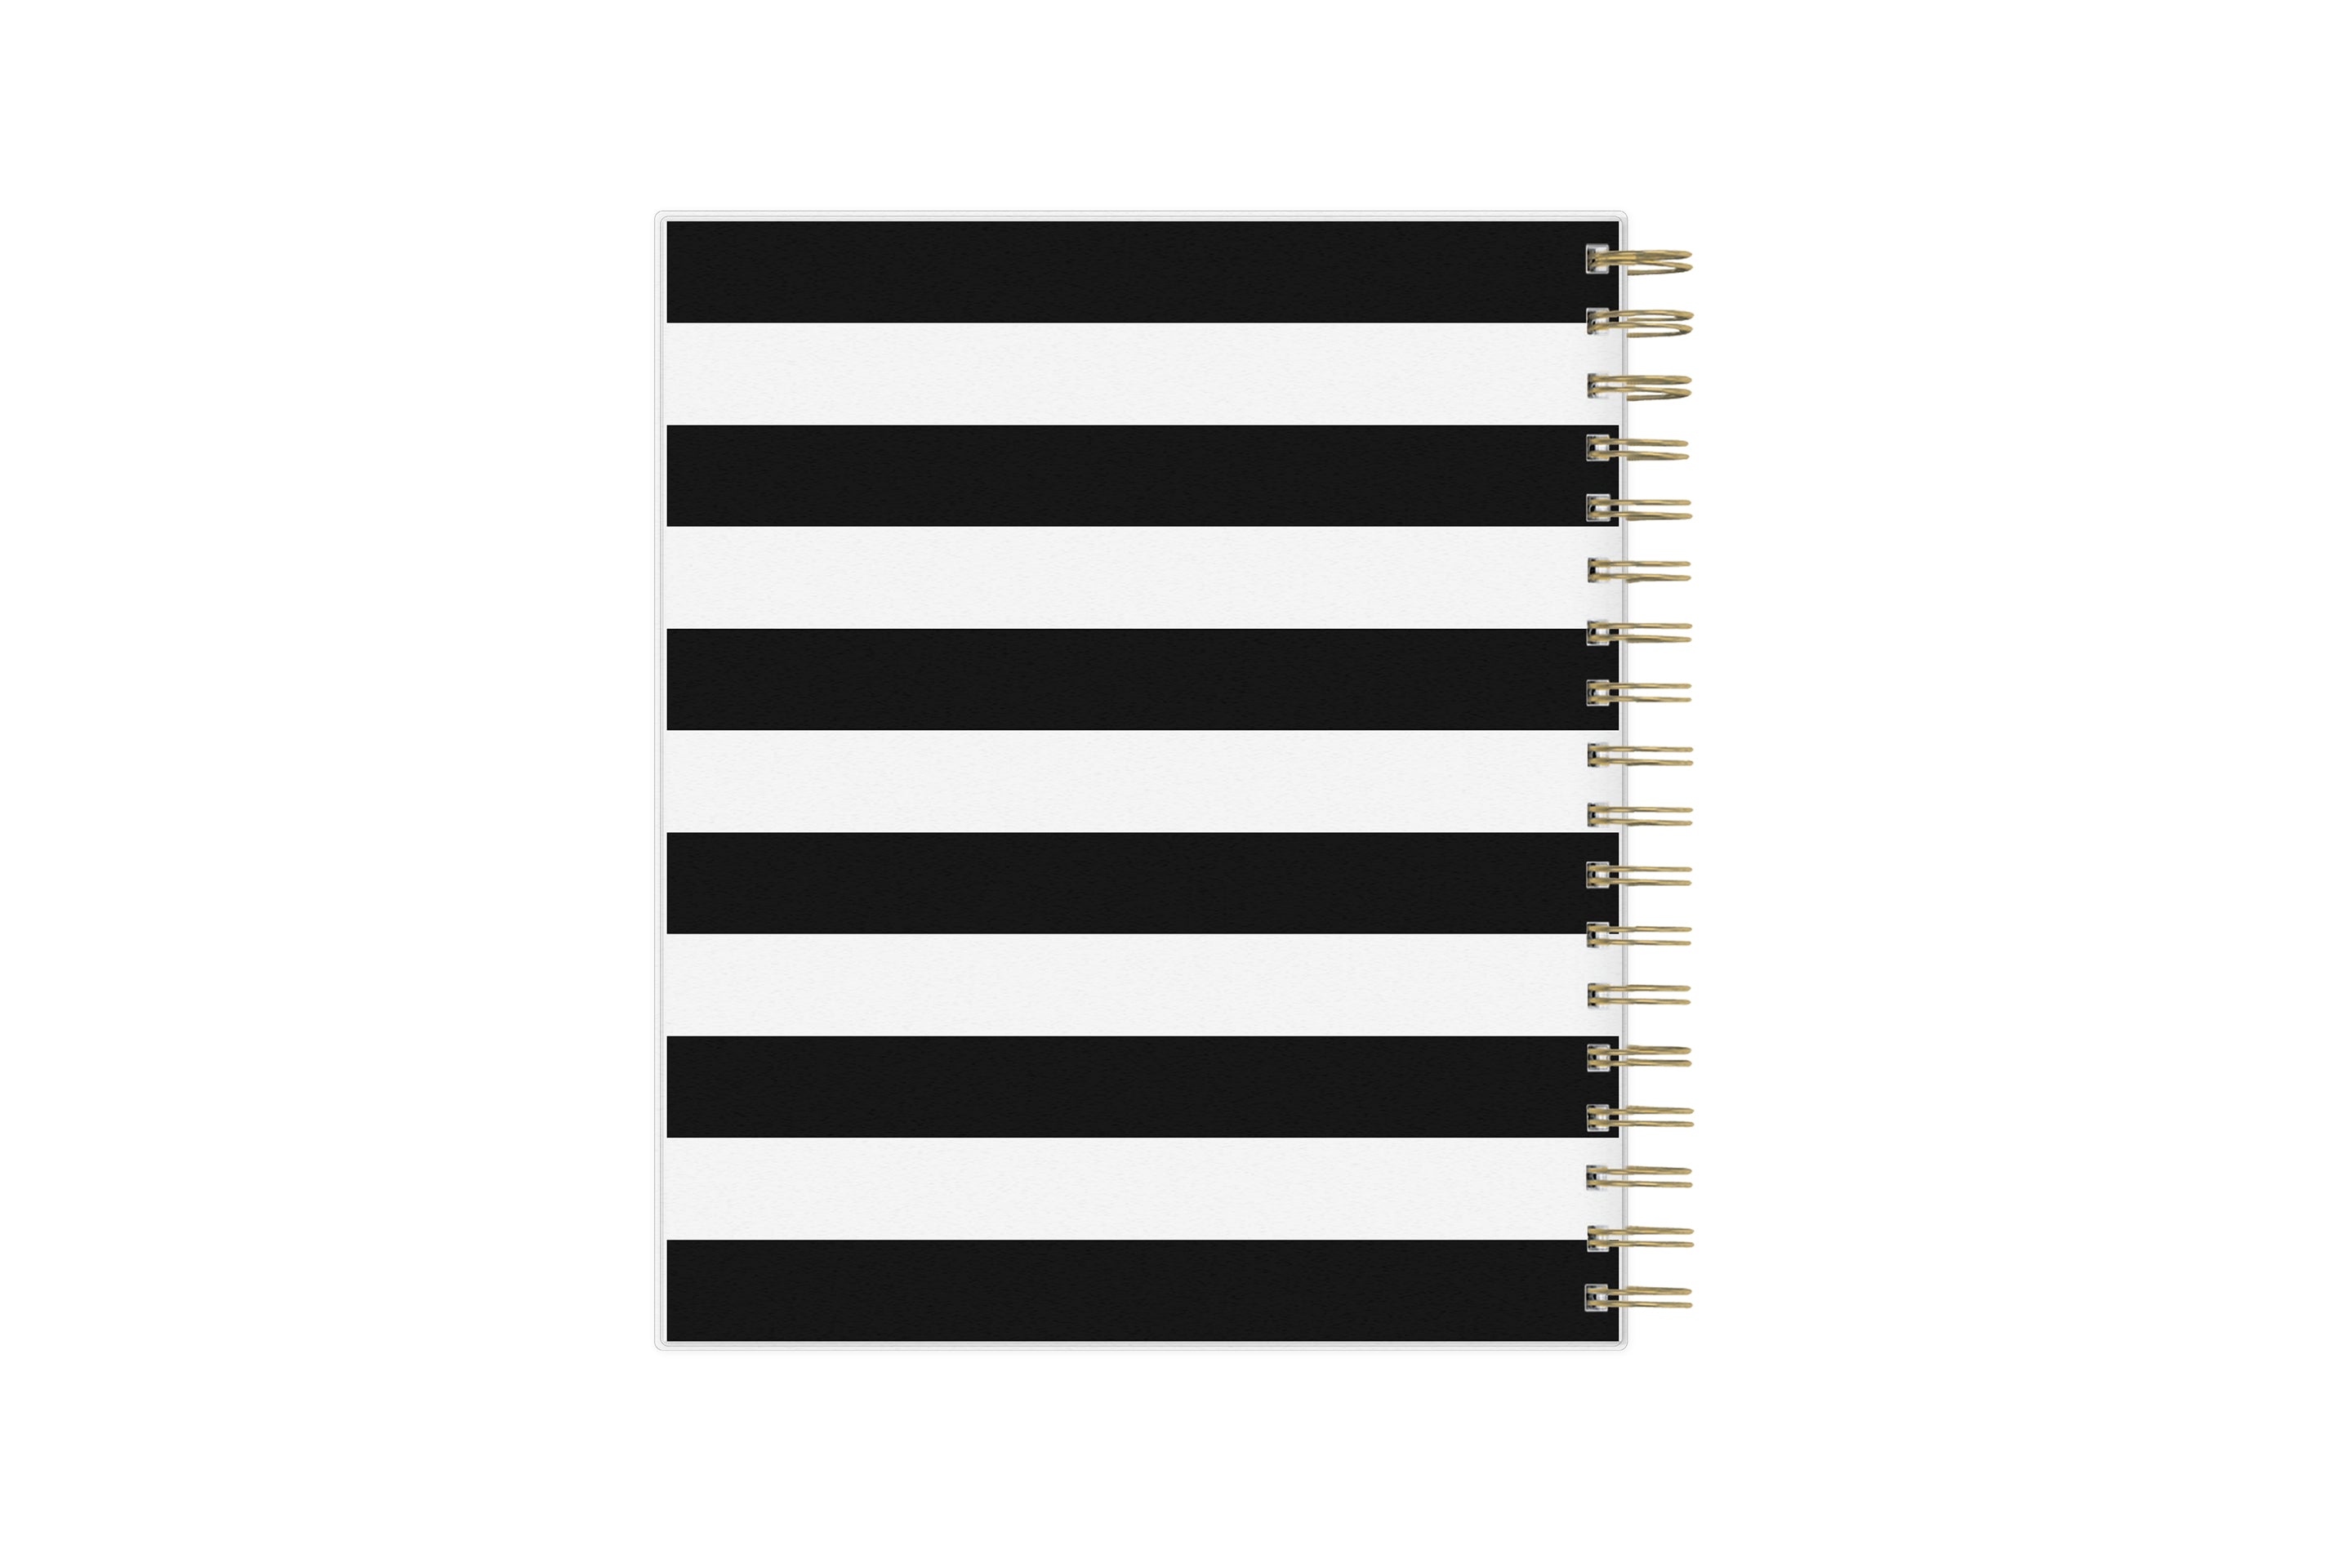  daily academic planner featuring black stripes back cover from Day designer for blue sky in a 8x10 planner size